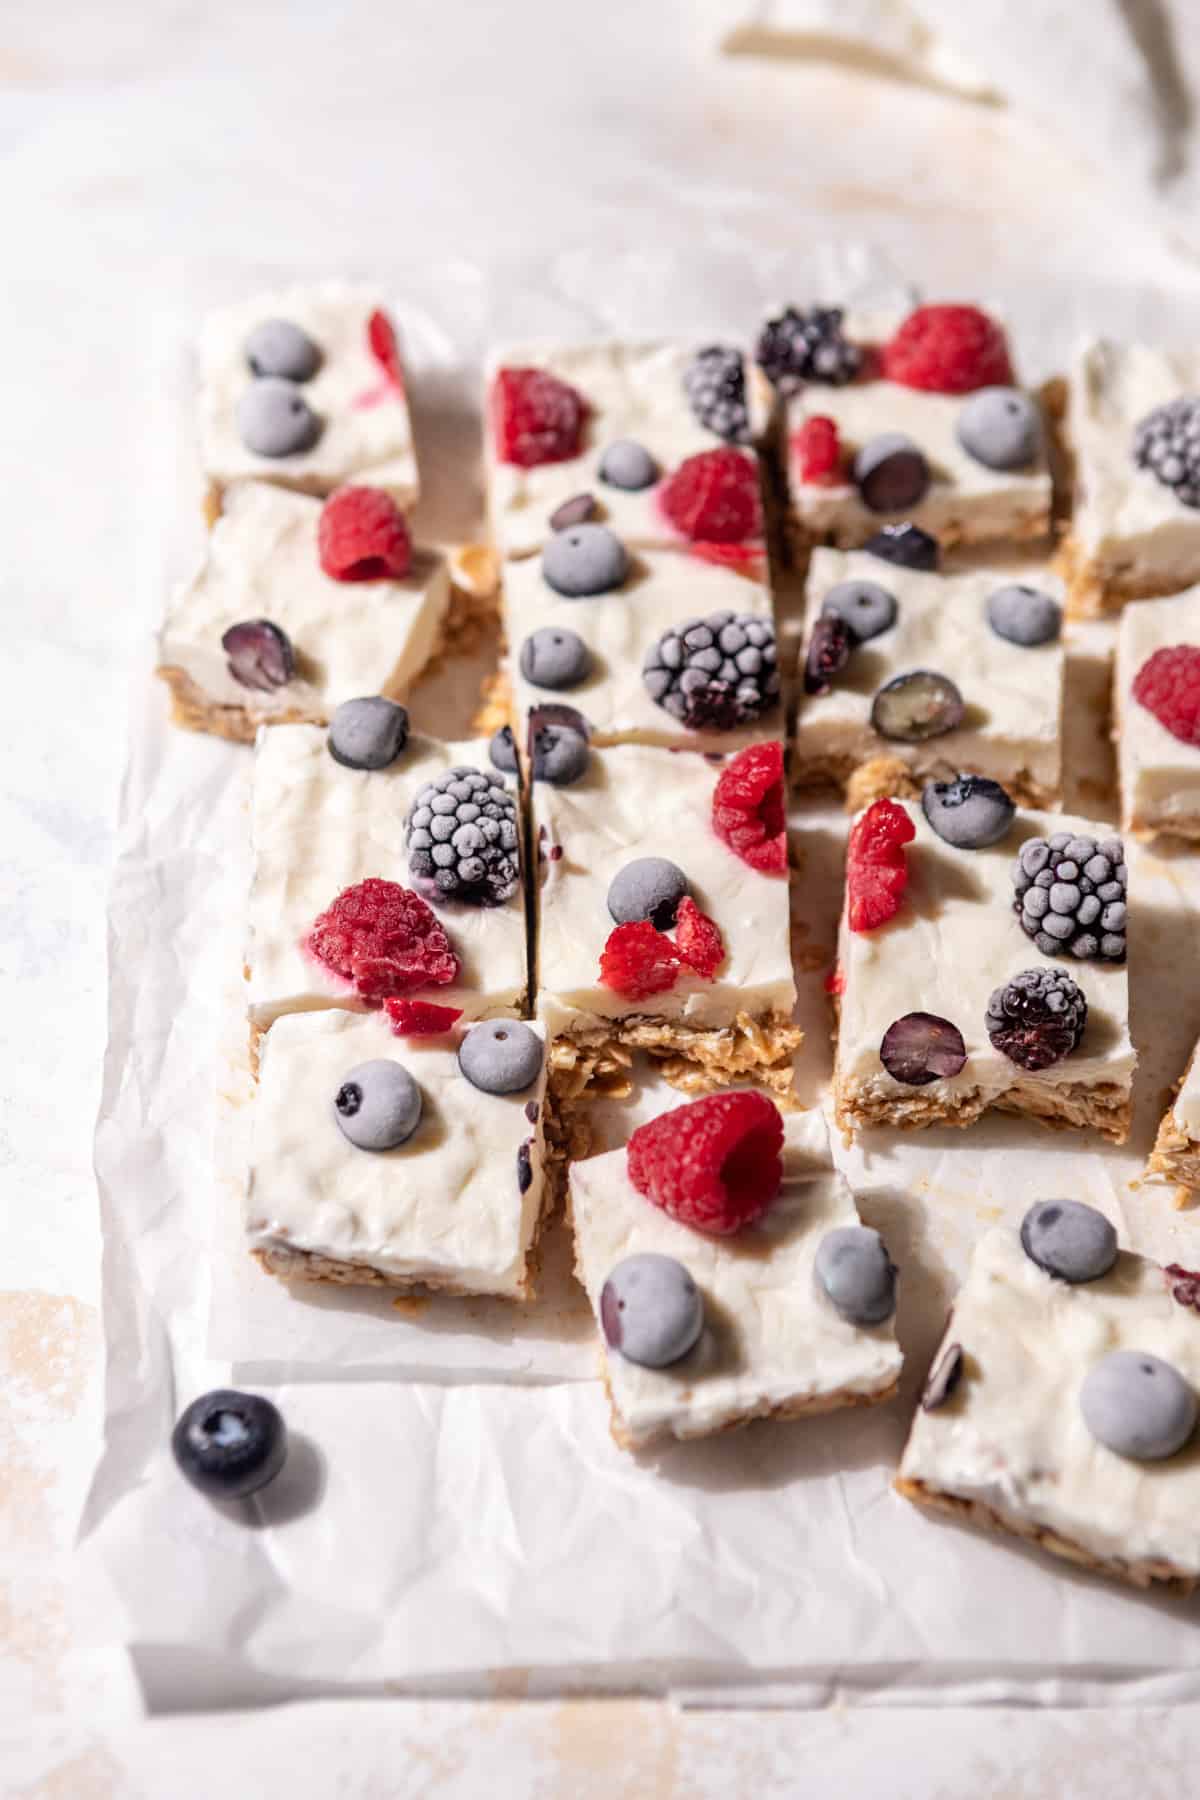 Frozen yogurt bar squares on parchment paper topped with a variety of fresh berries.